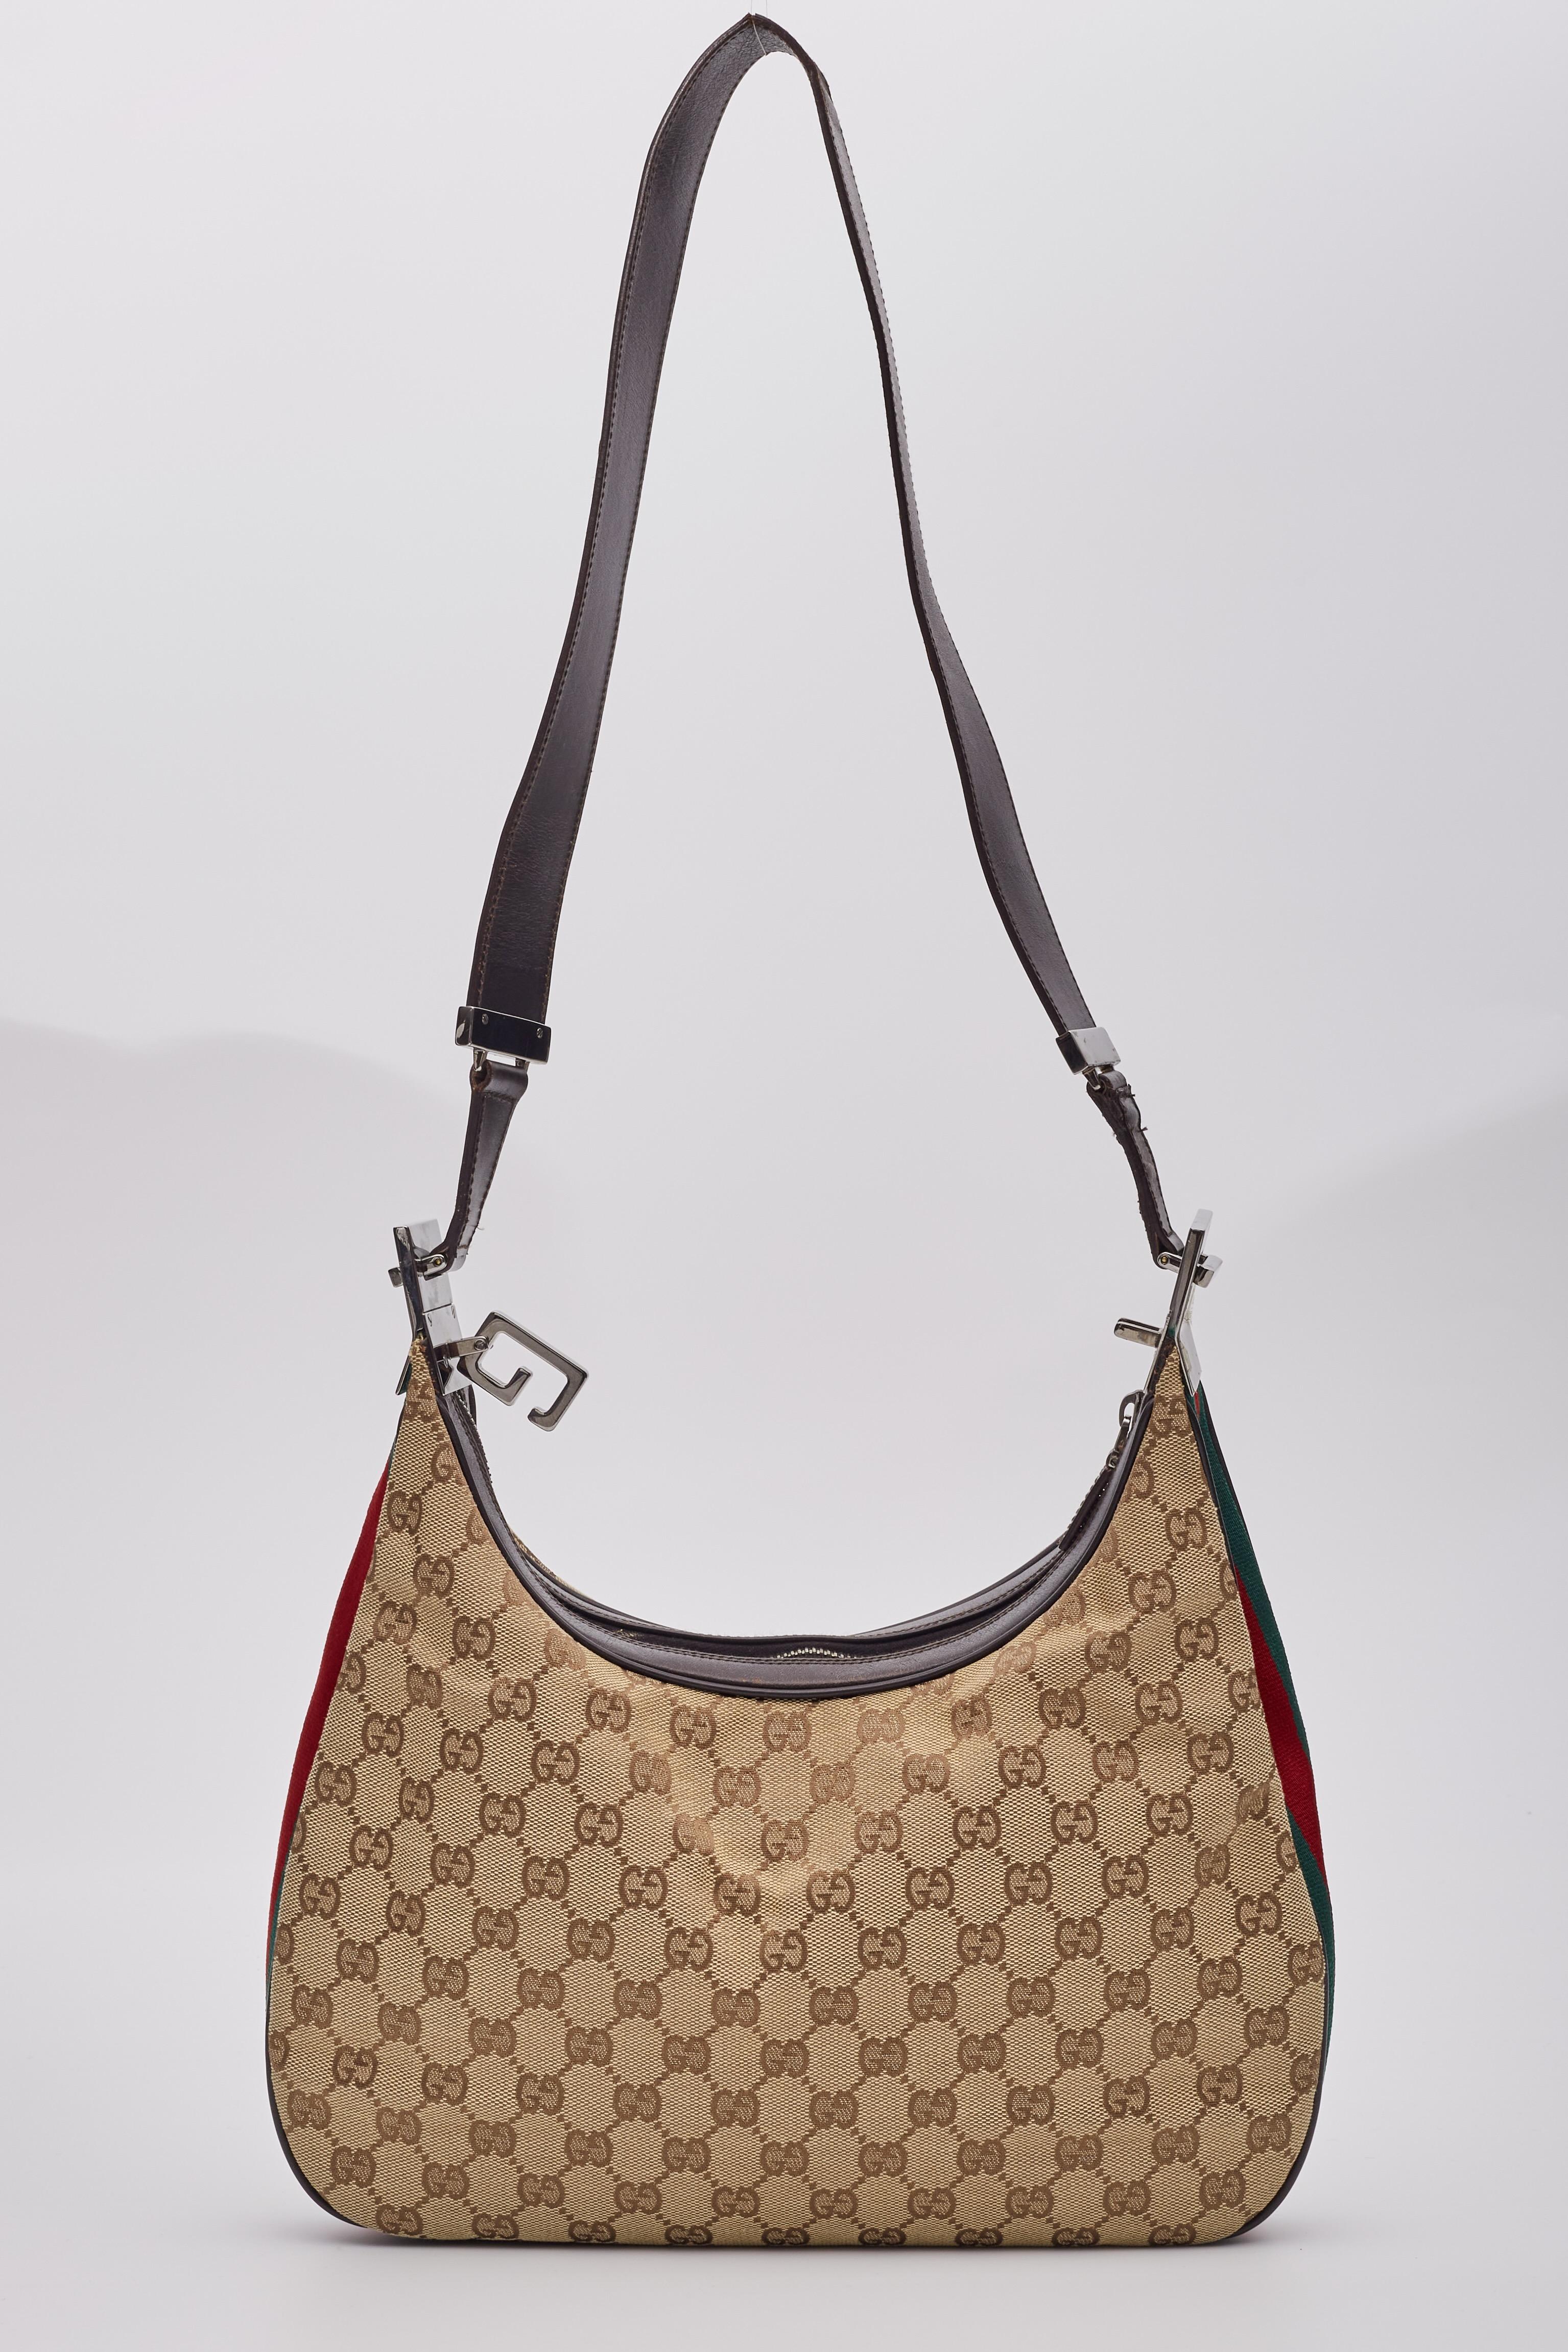 Gucci Monogram GG Canvas Beige Web Details Hobo Bag In Good Condition For Sale In Montreal, Quebec